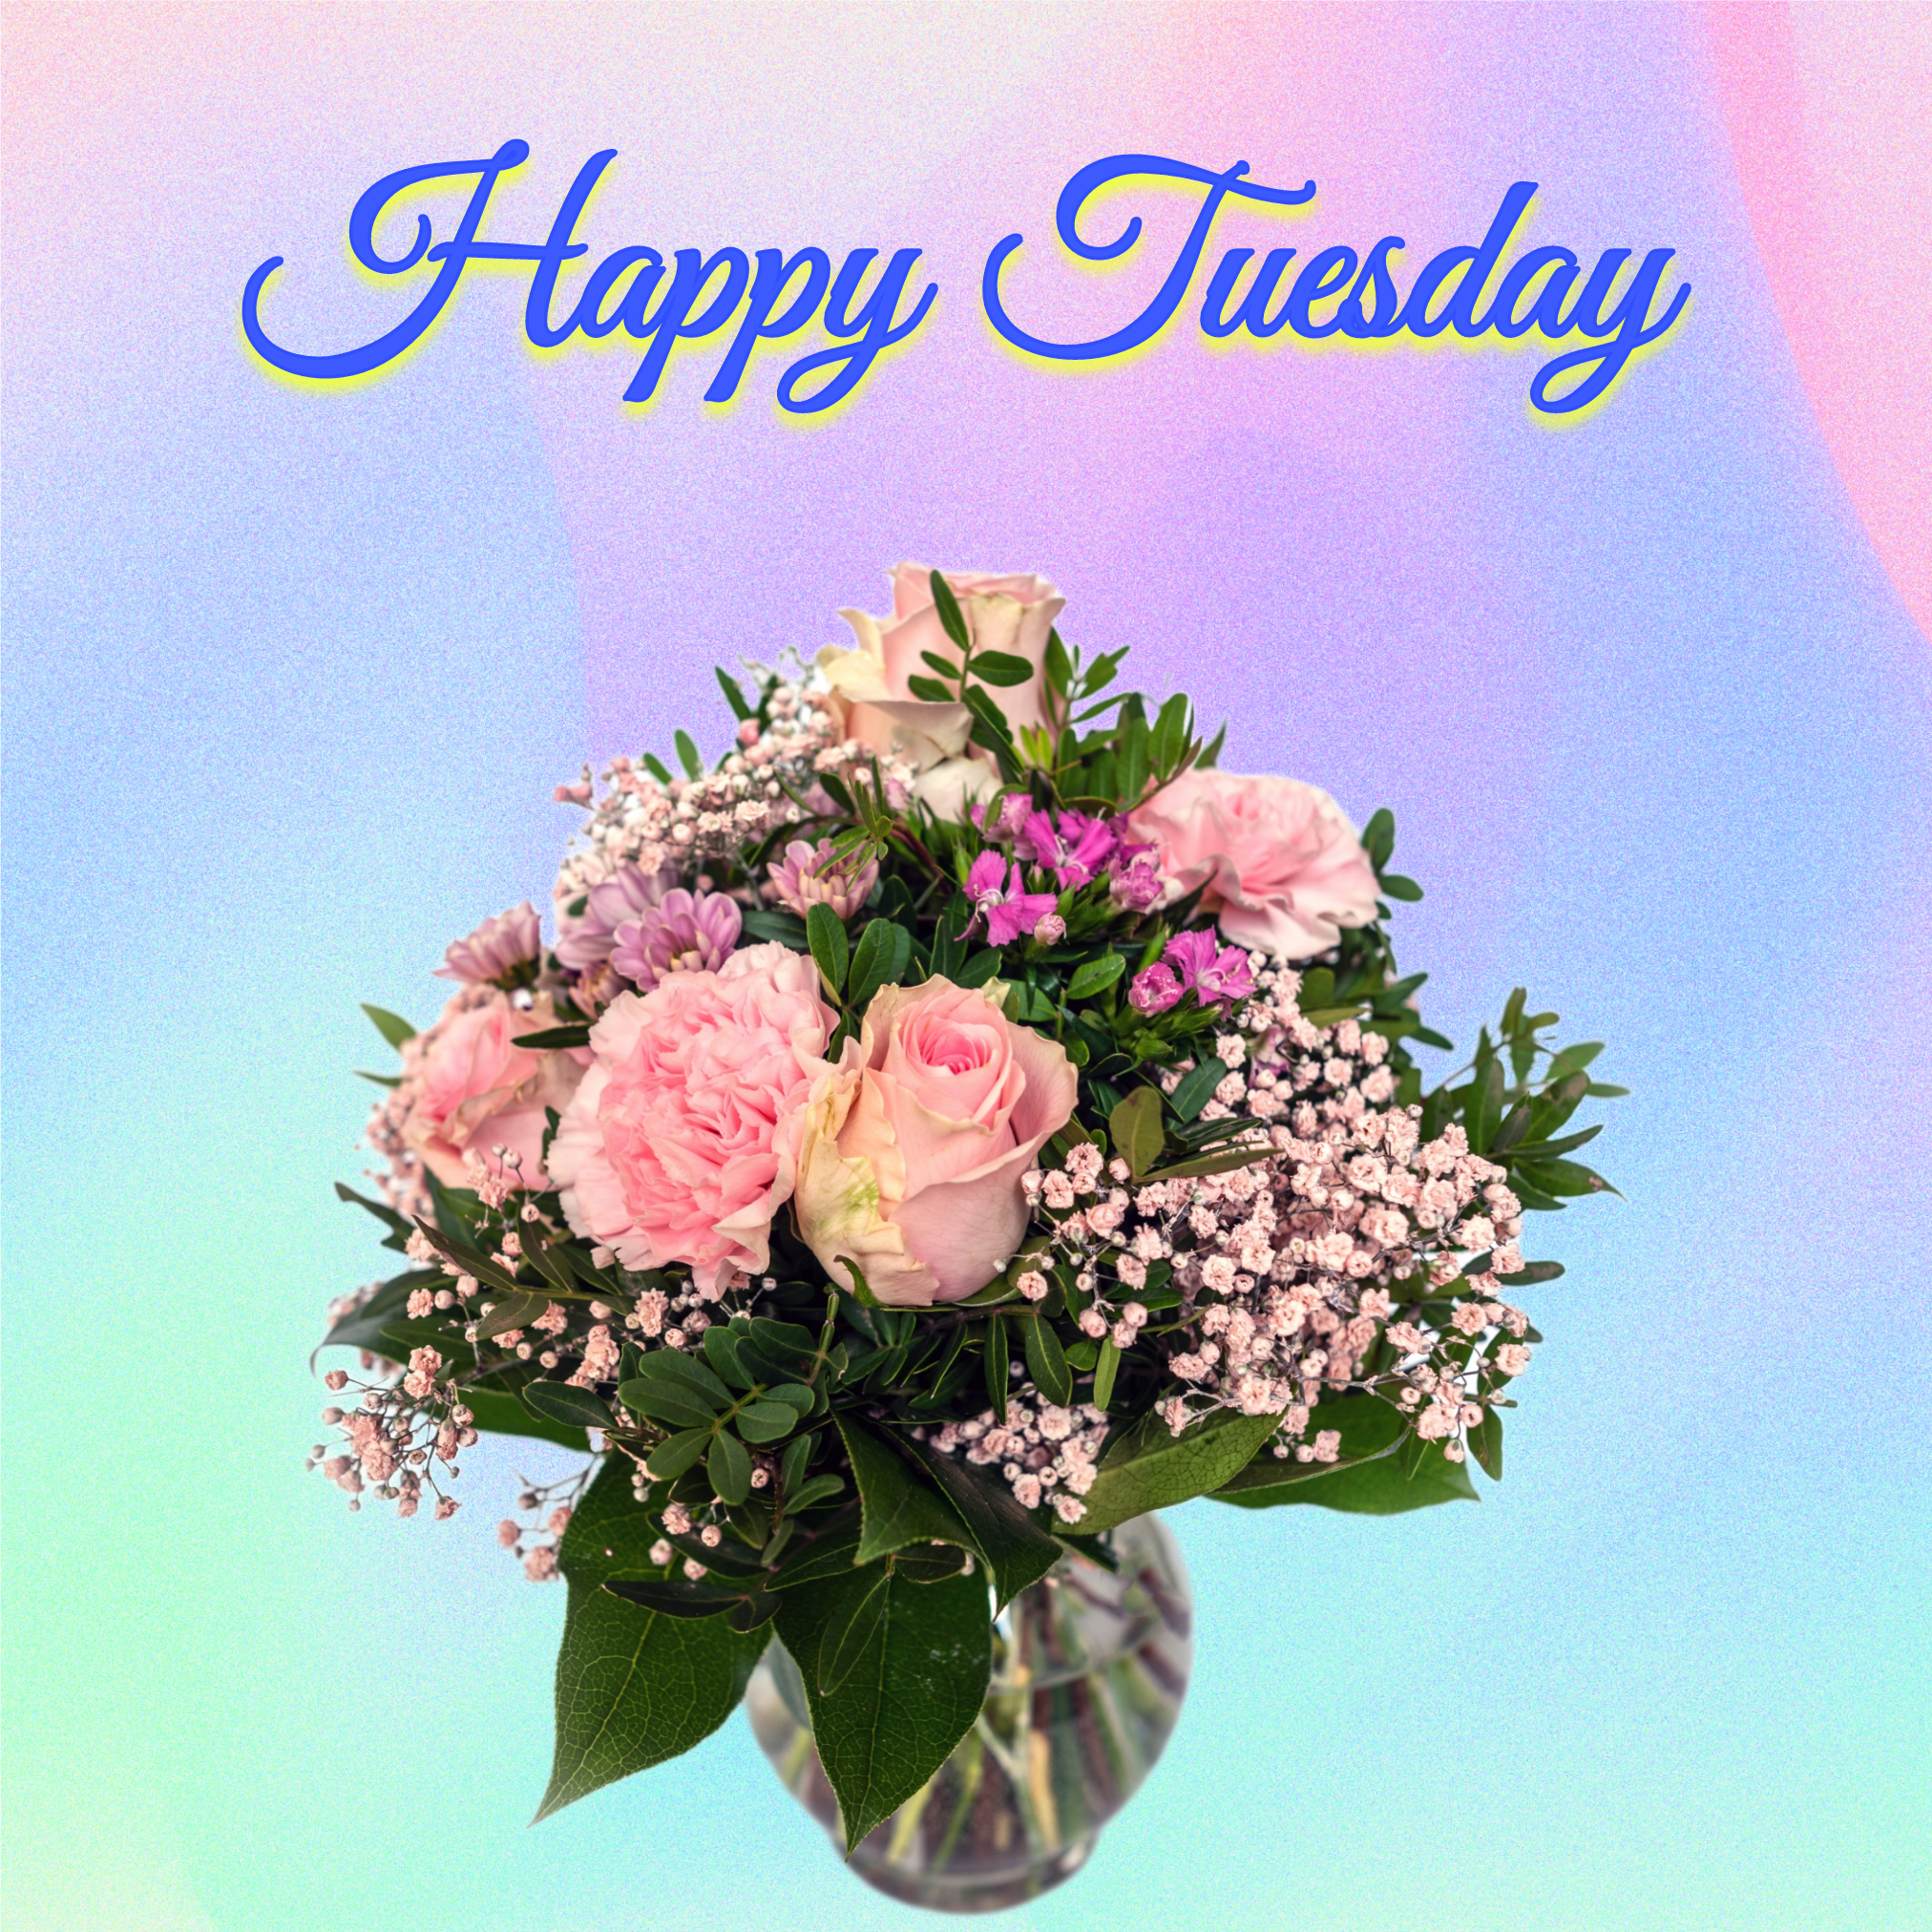 Happy Tuesday Images for Whatsapp